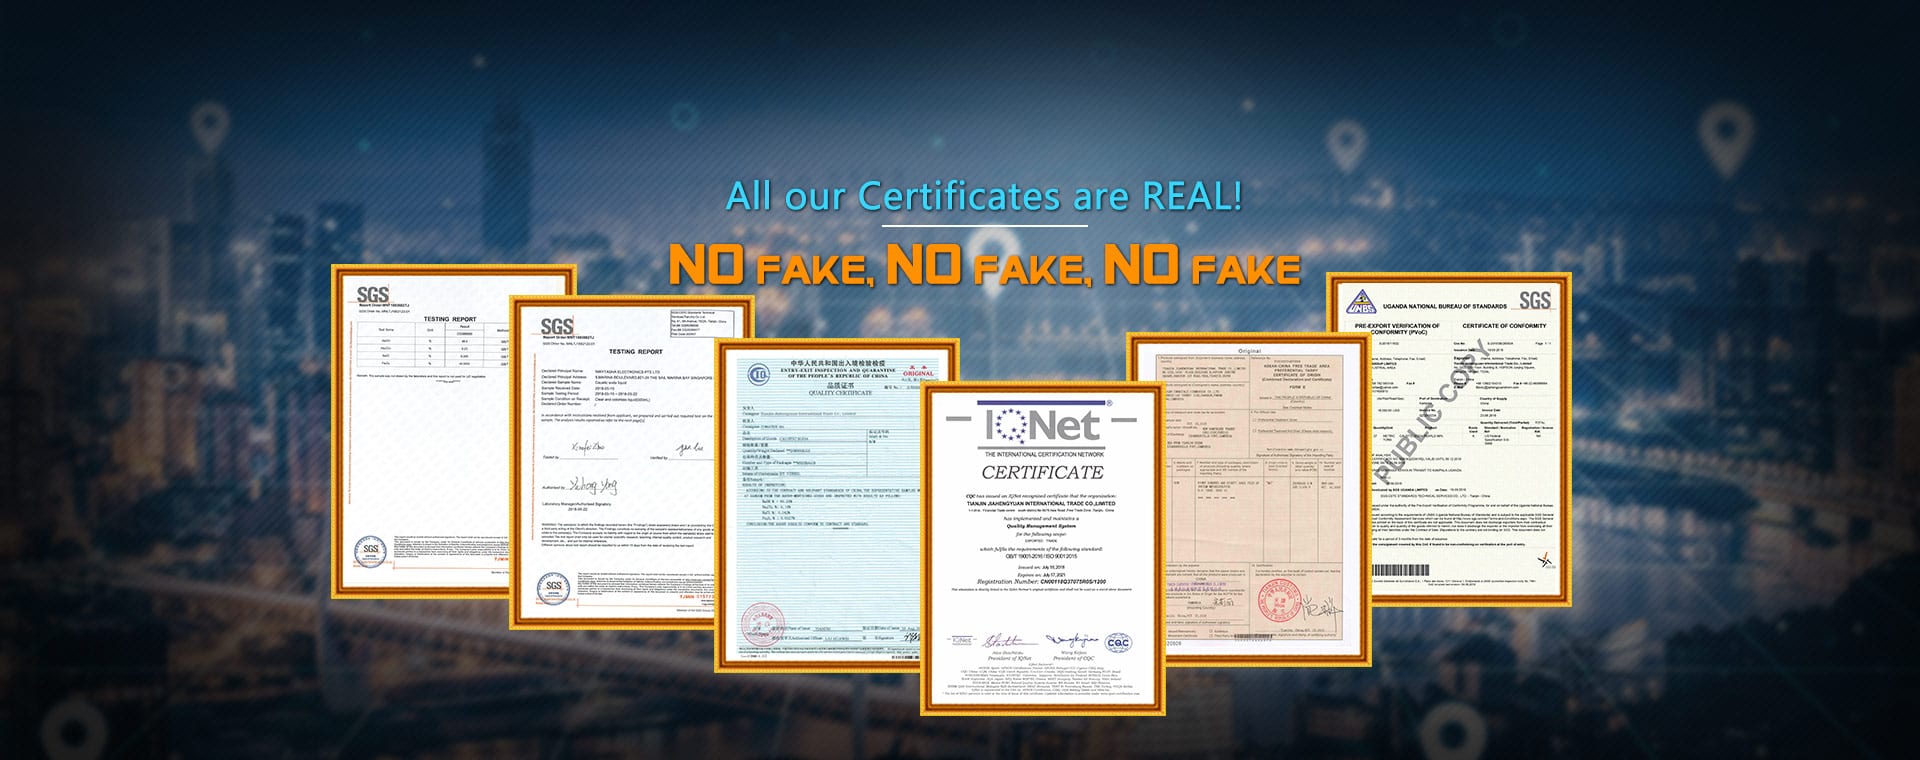 All our Certificates are REAL!